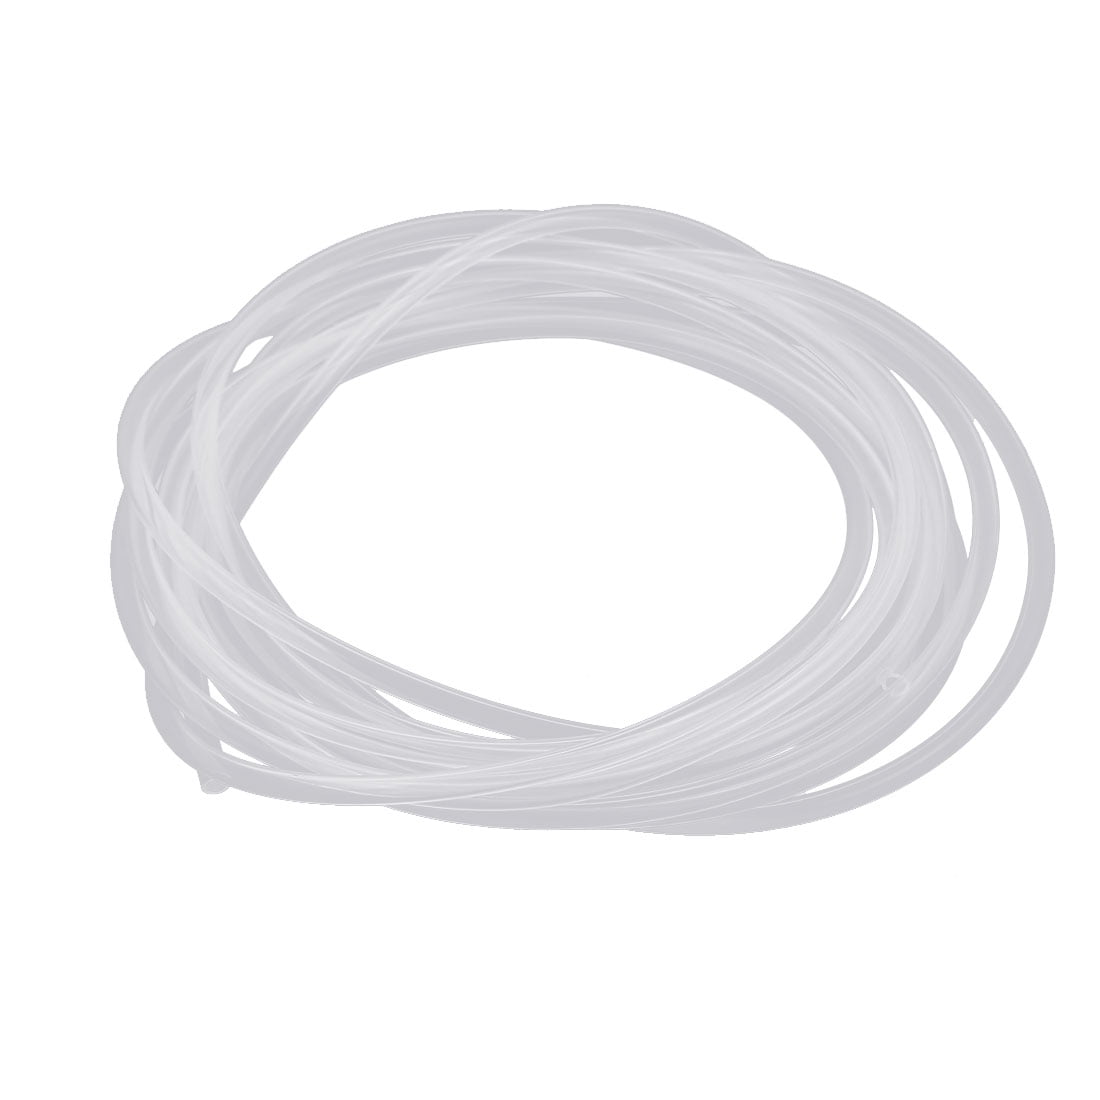 PVC Clear Vinly Tubing,6mm ID x 8mm OD,5 Meter/16.4ft,Plastic Flexible Hose Tube 